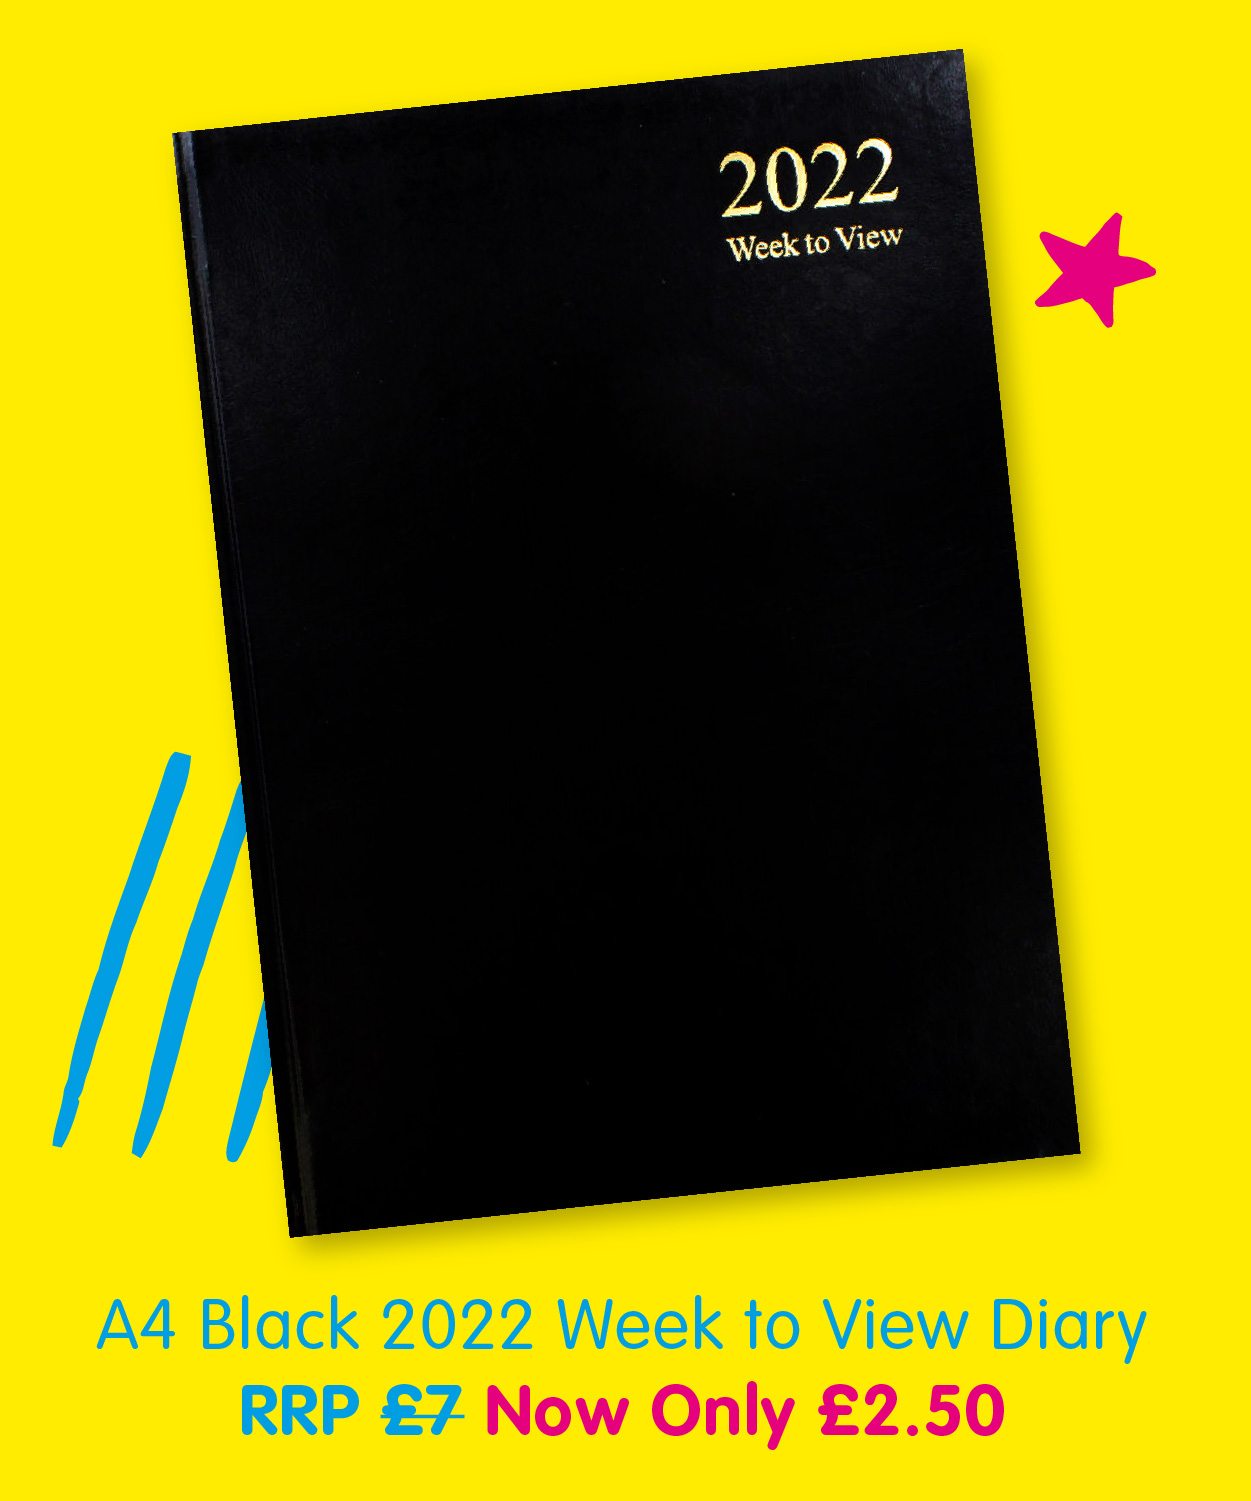 A4 Black 2022 Week to View Diary